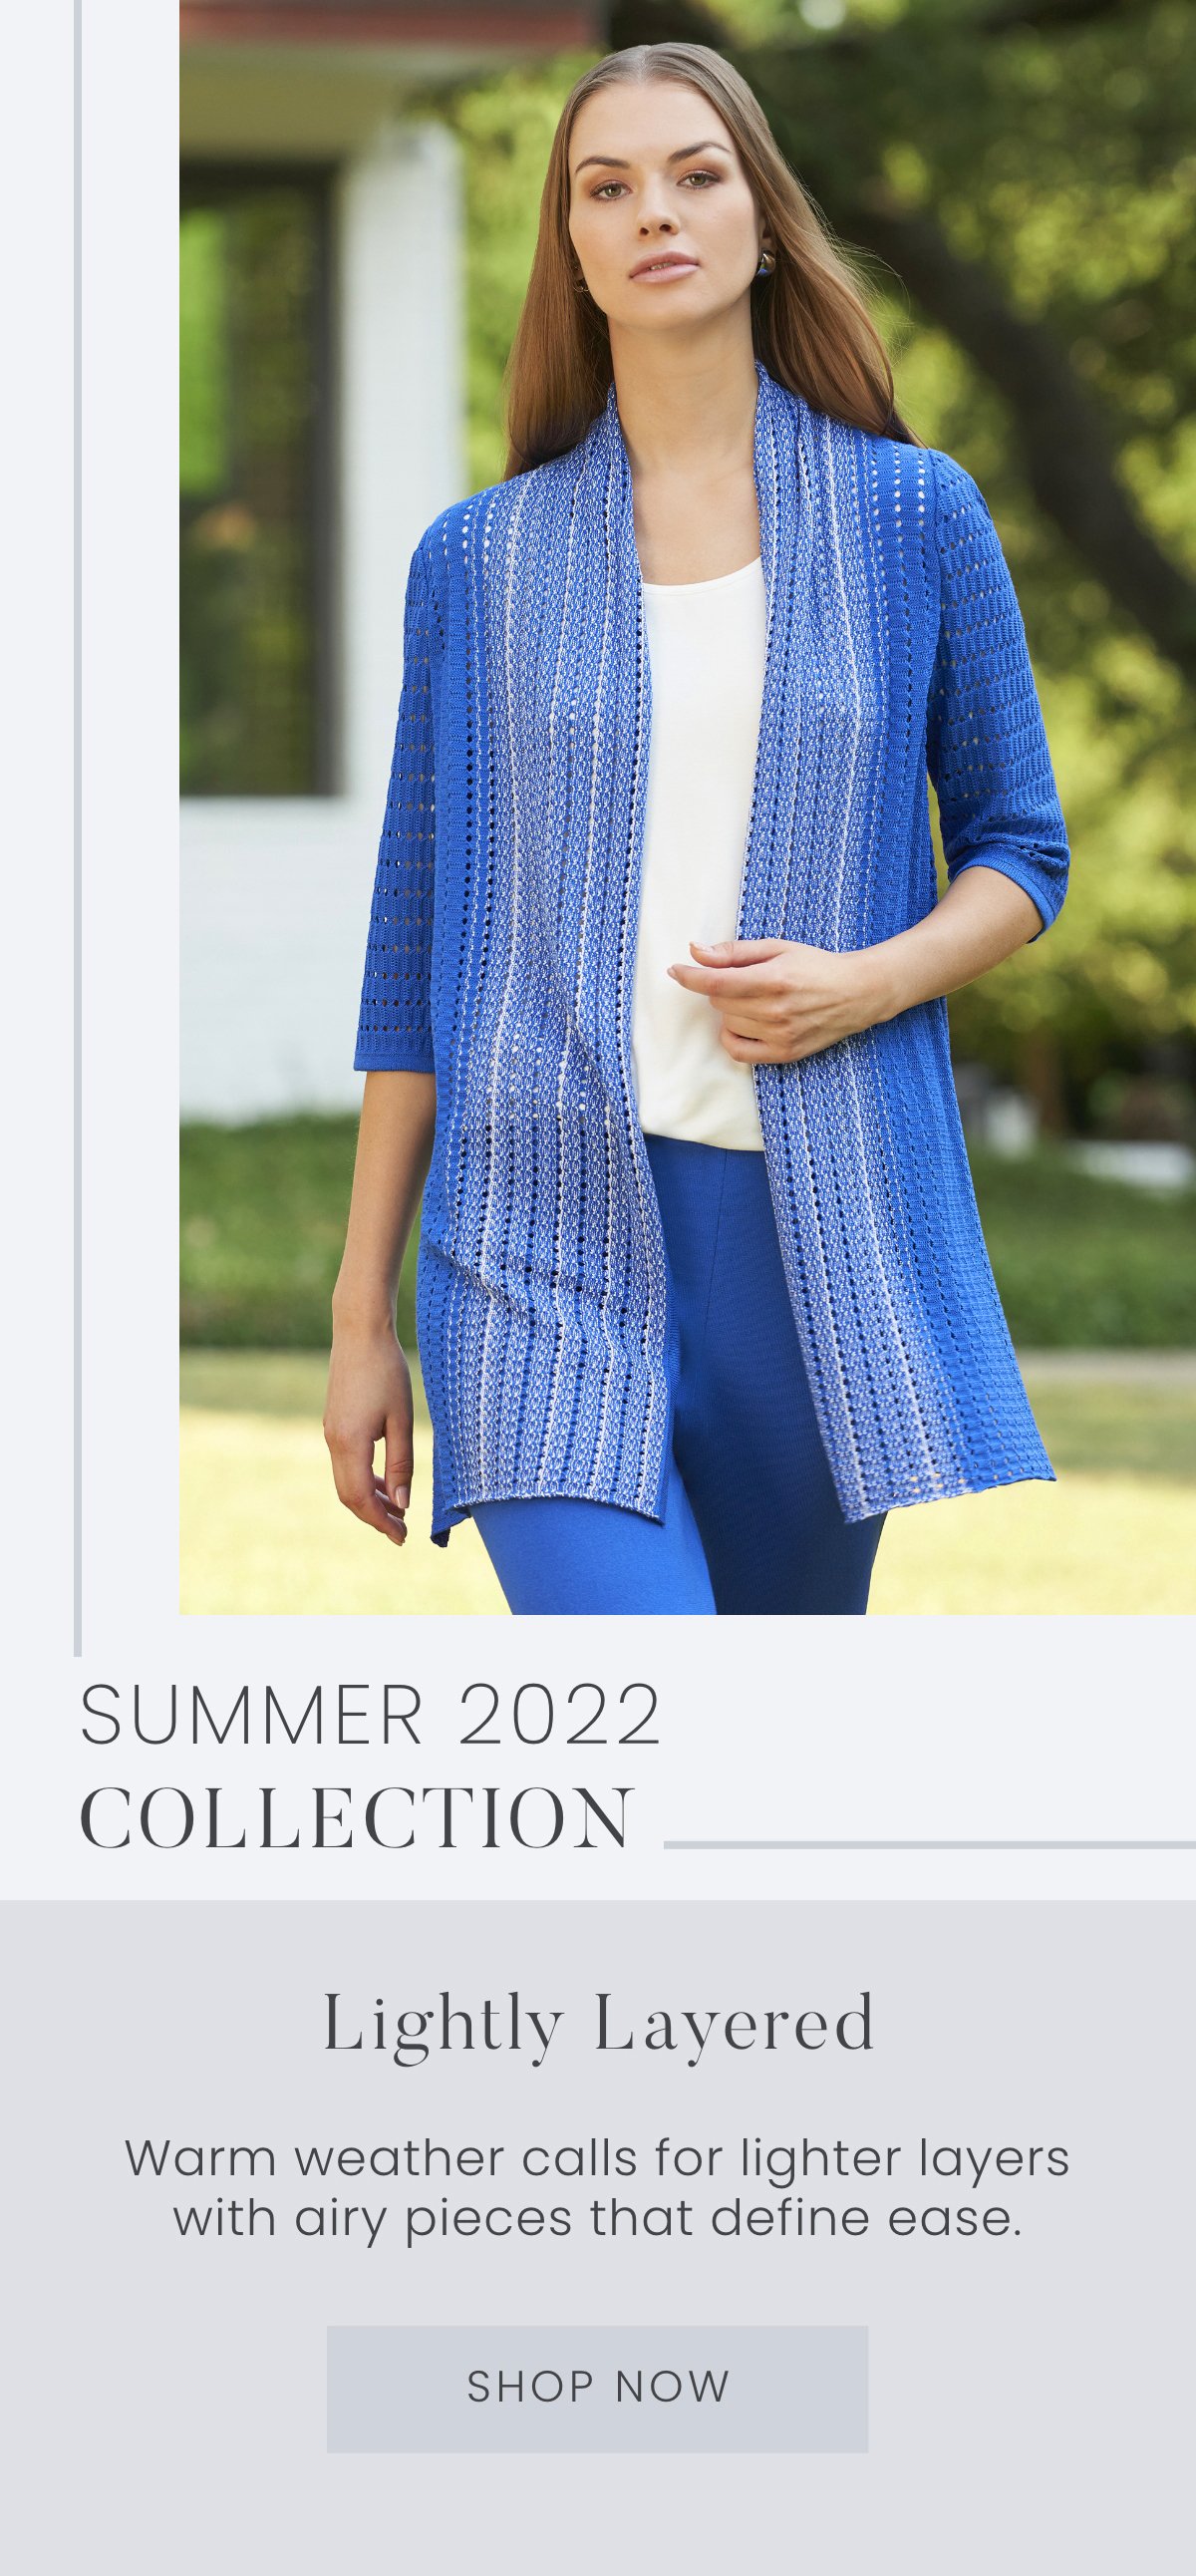 Summer 2022 Collection: Lightly Layered - Warm weather calls for lighter layers with airy pieces that define ease. Shop Now >>